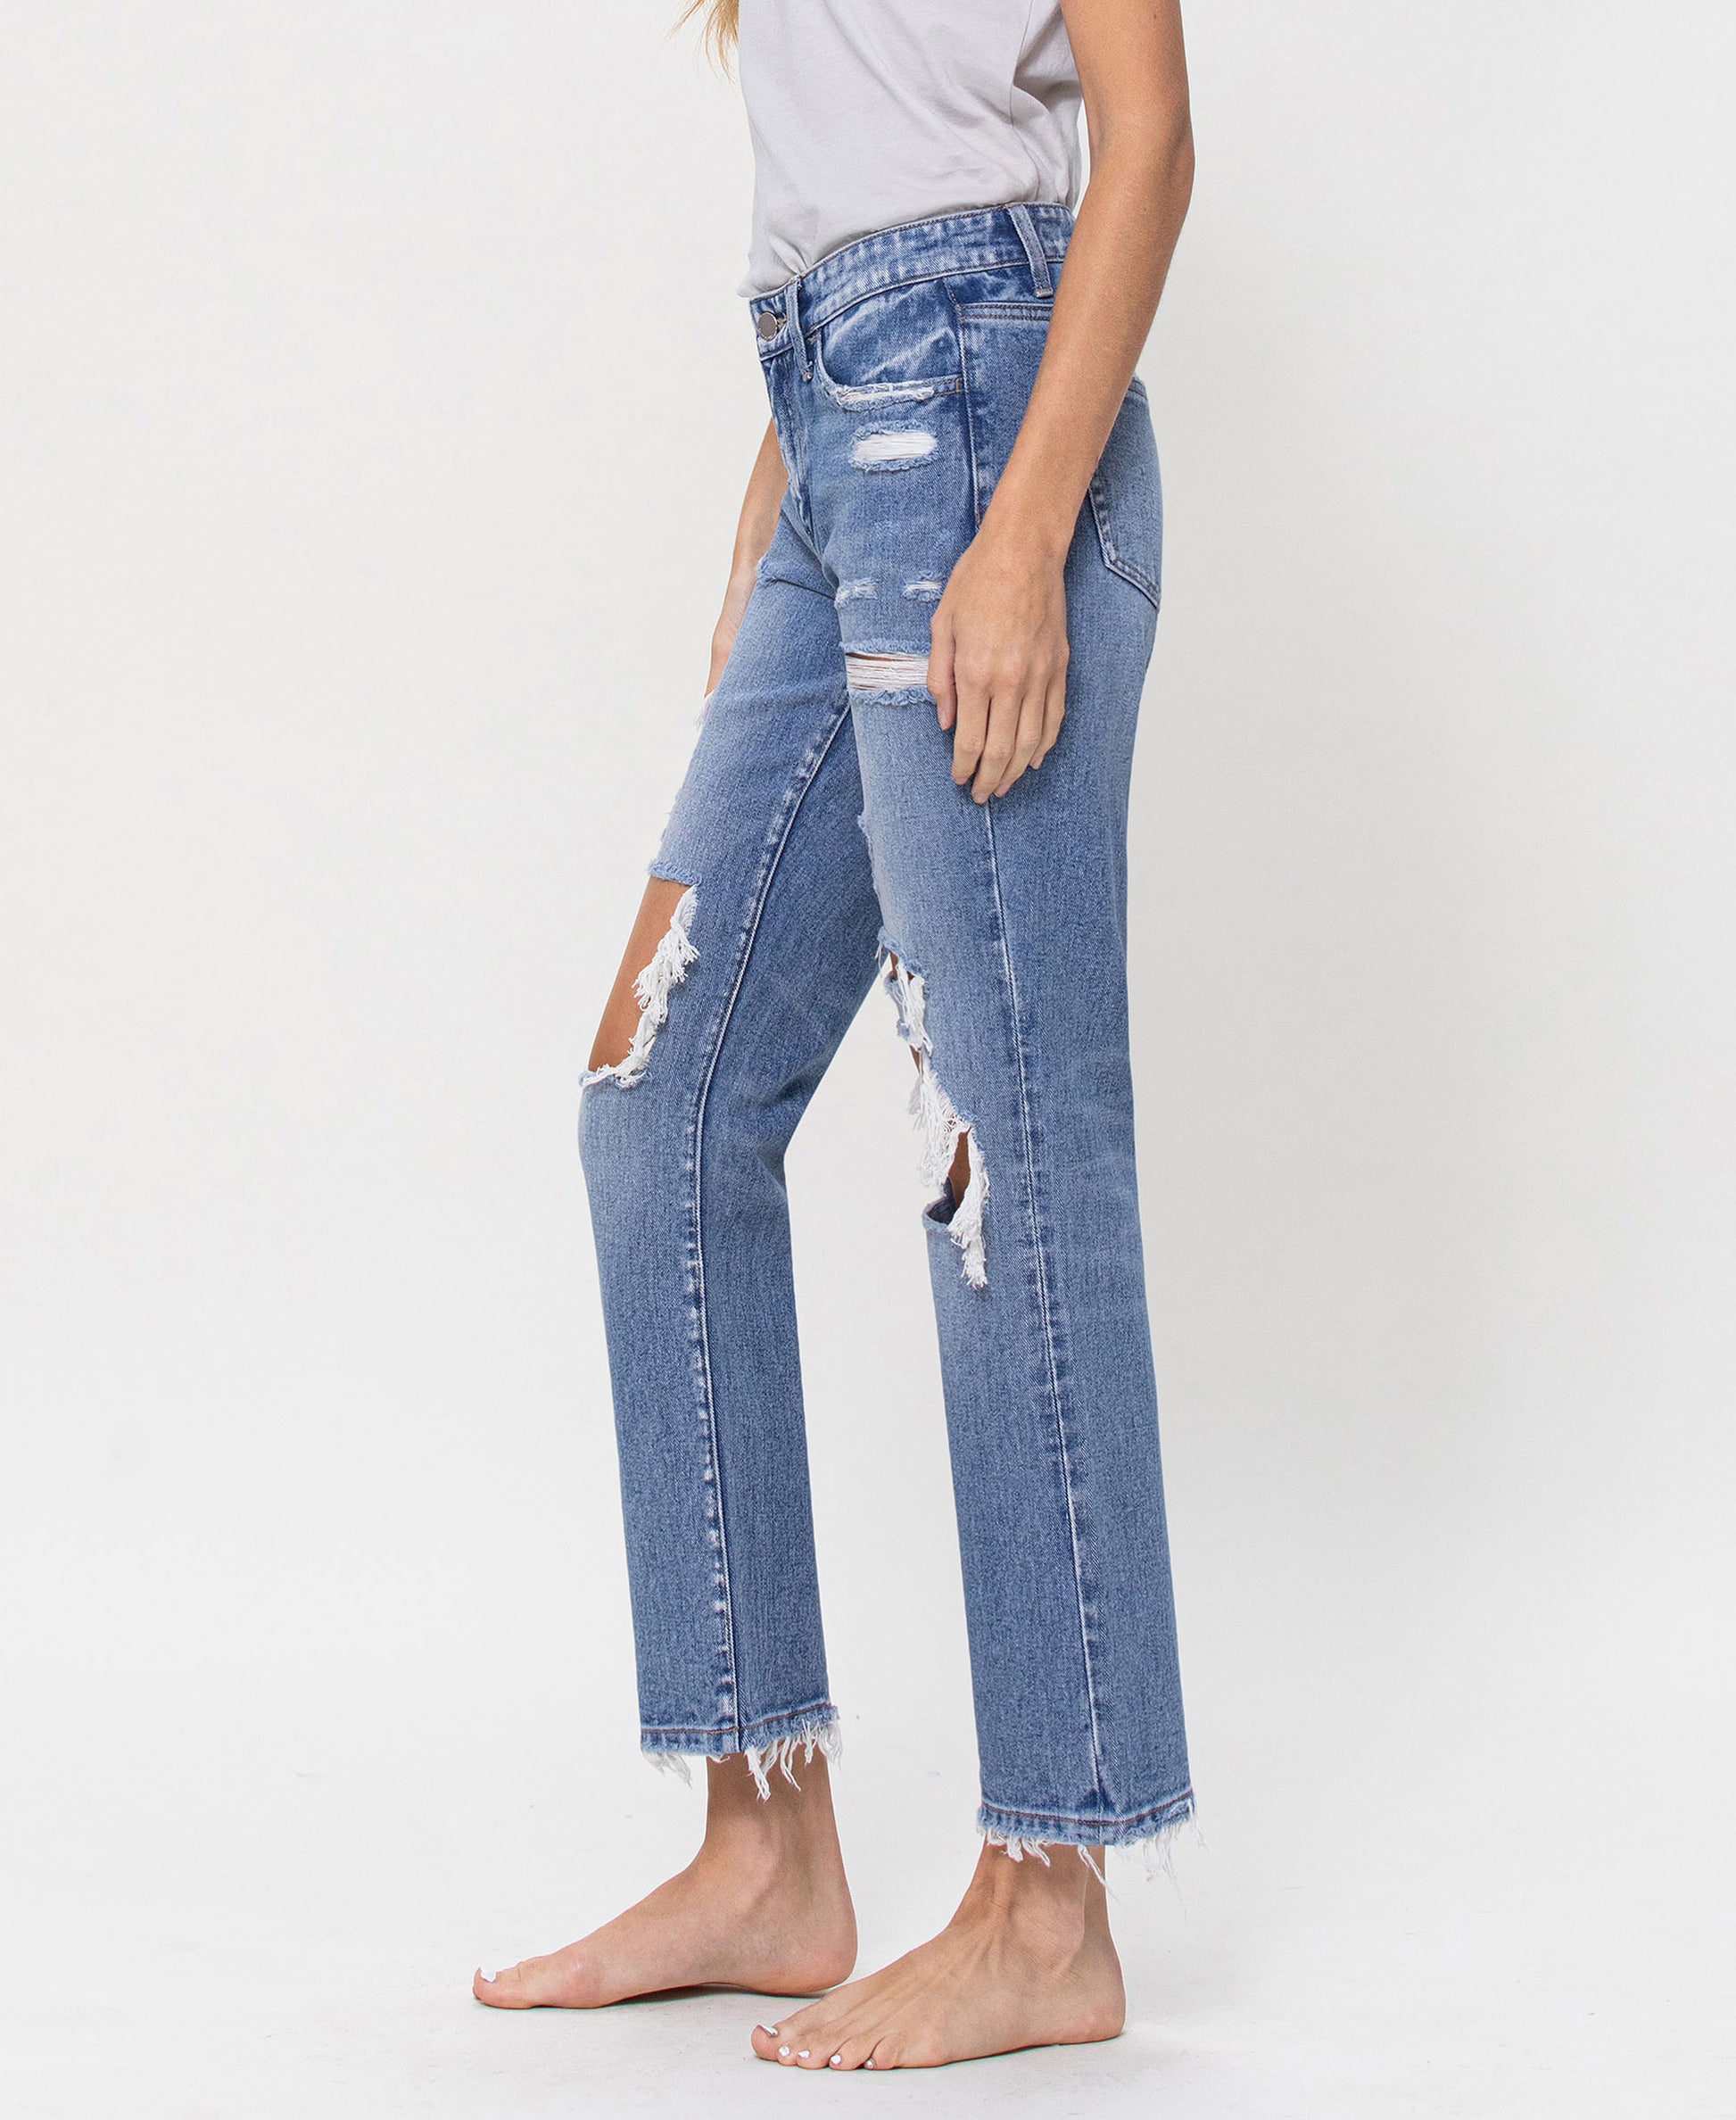 Left side product images of Brighten - High Rise Crop Straight Jeans